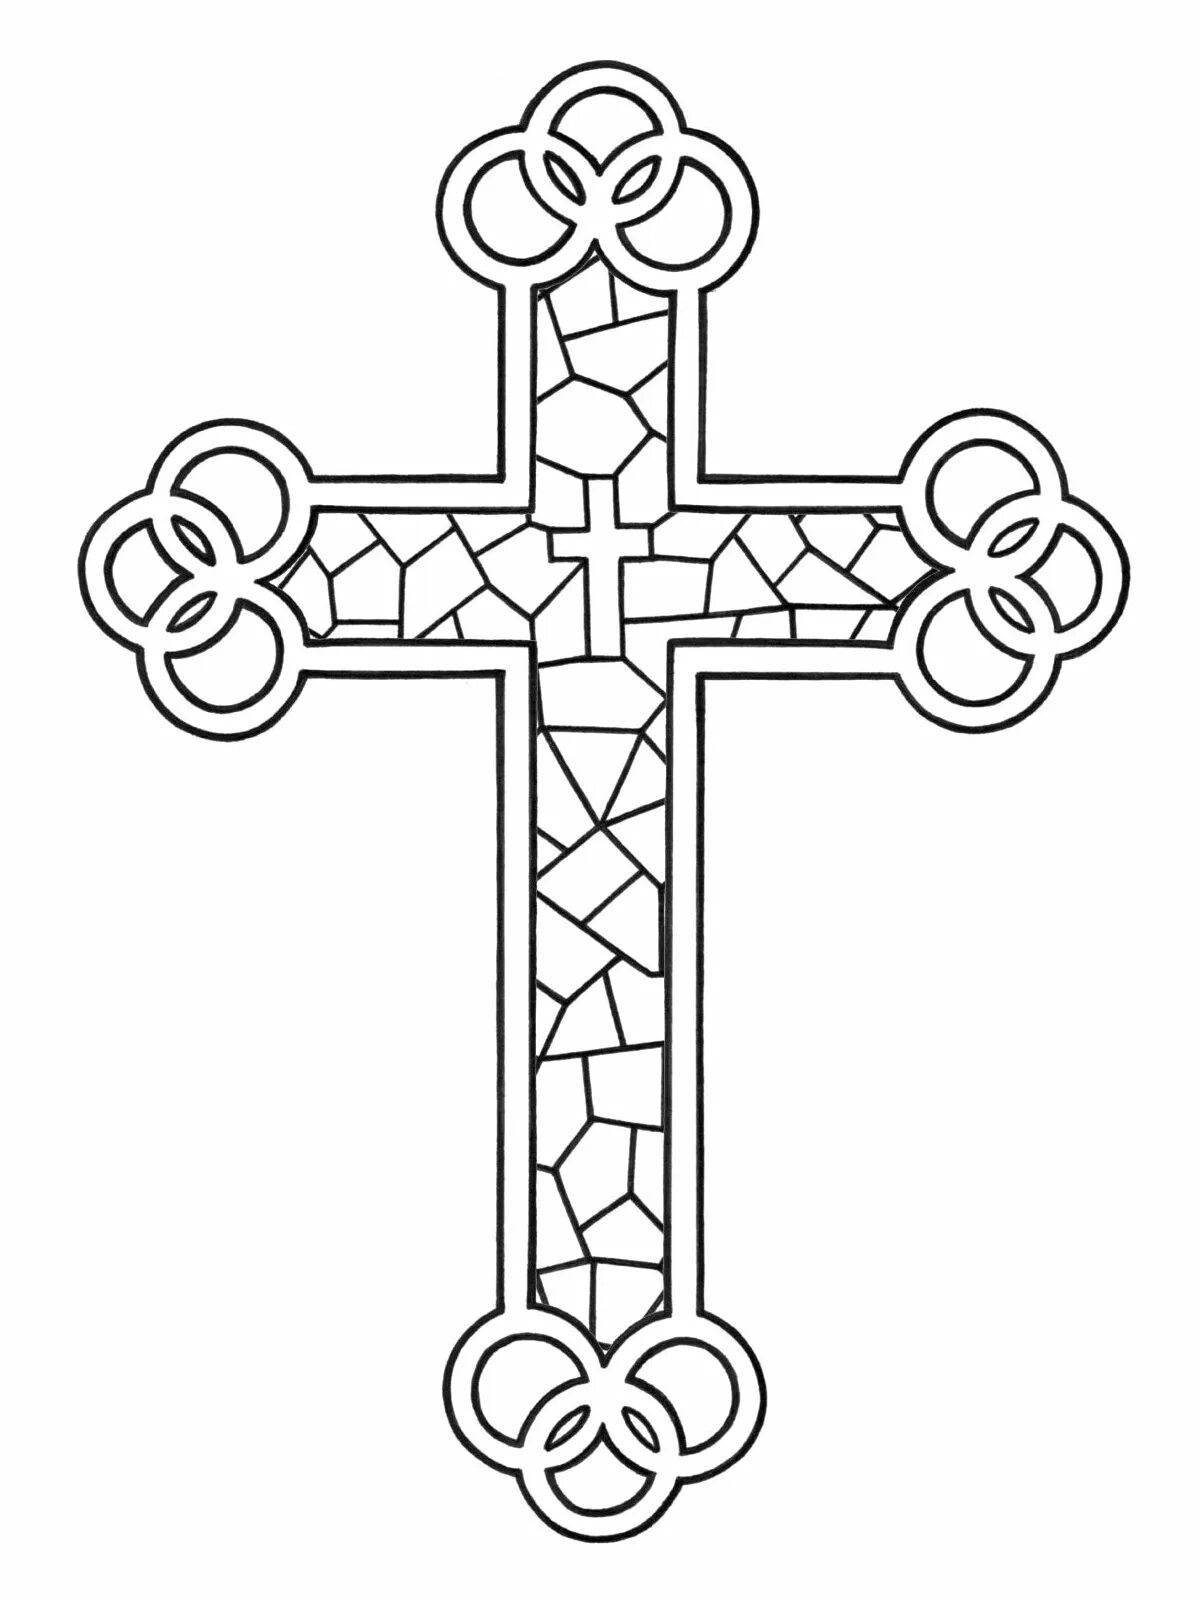 Children's cross coloring pages